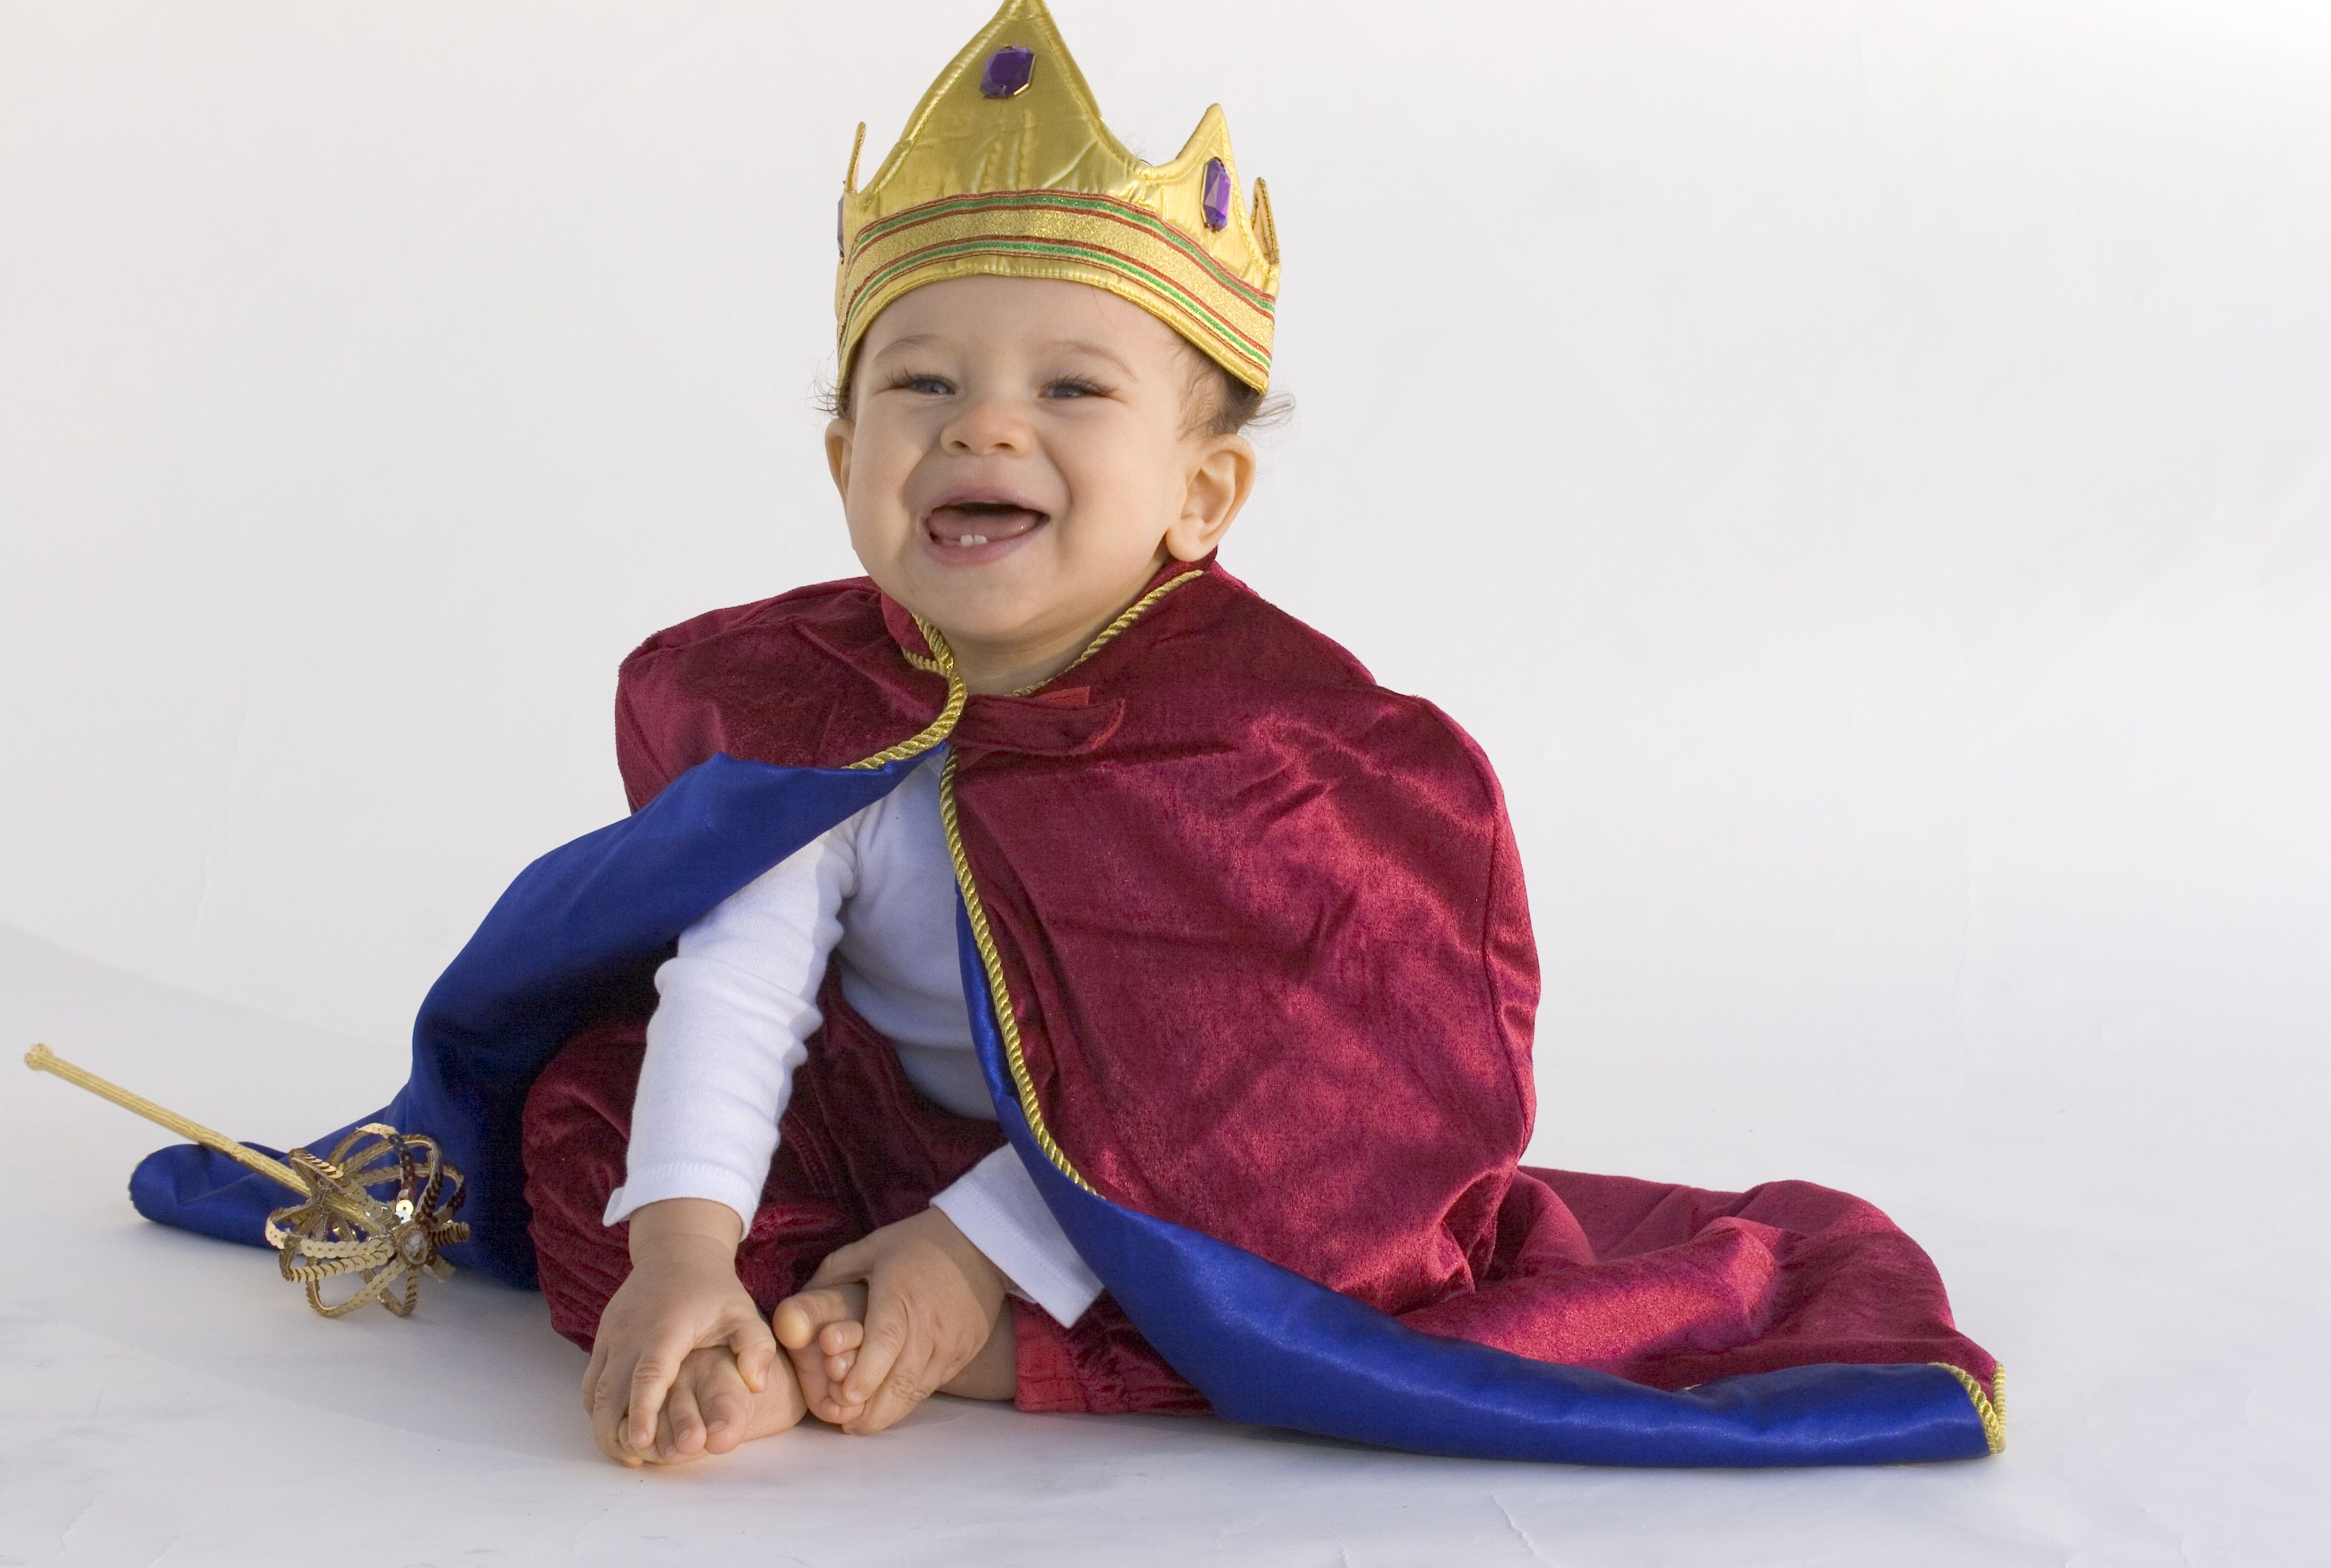 11 Monarchs Crowned While They Were In Diapers Mental Floss